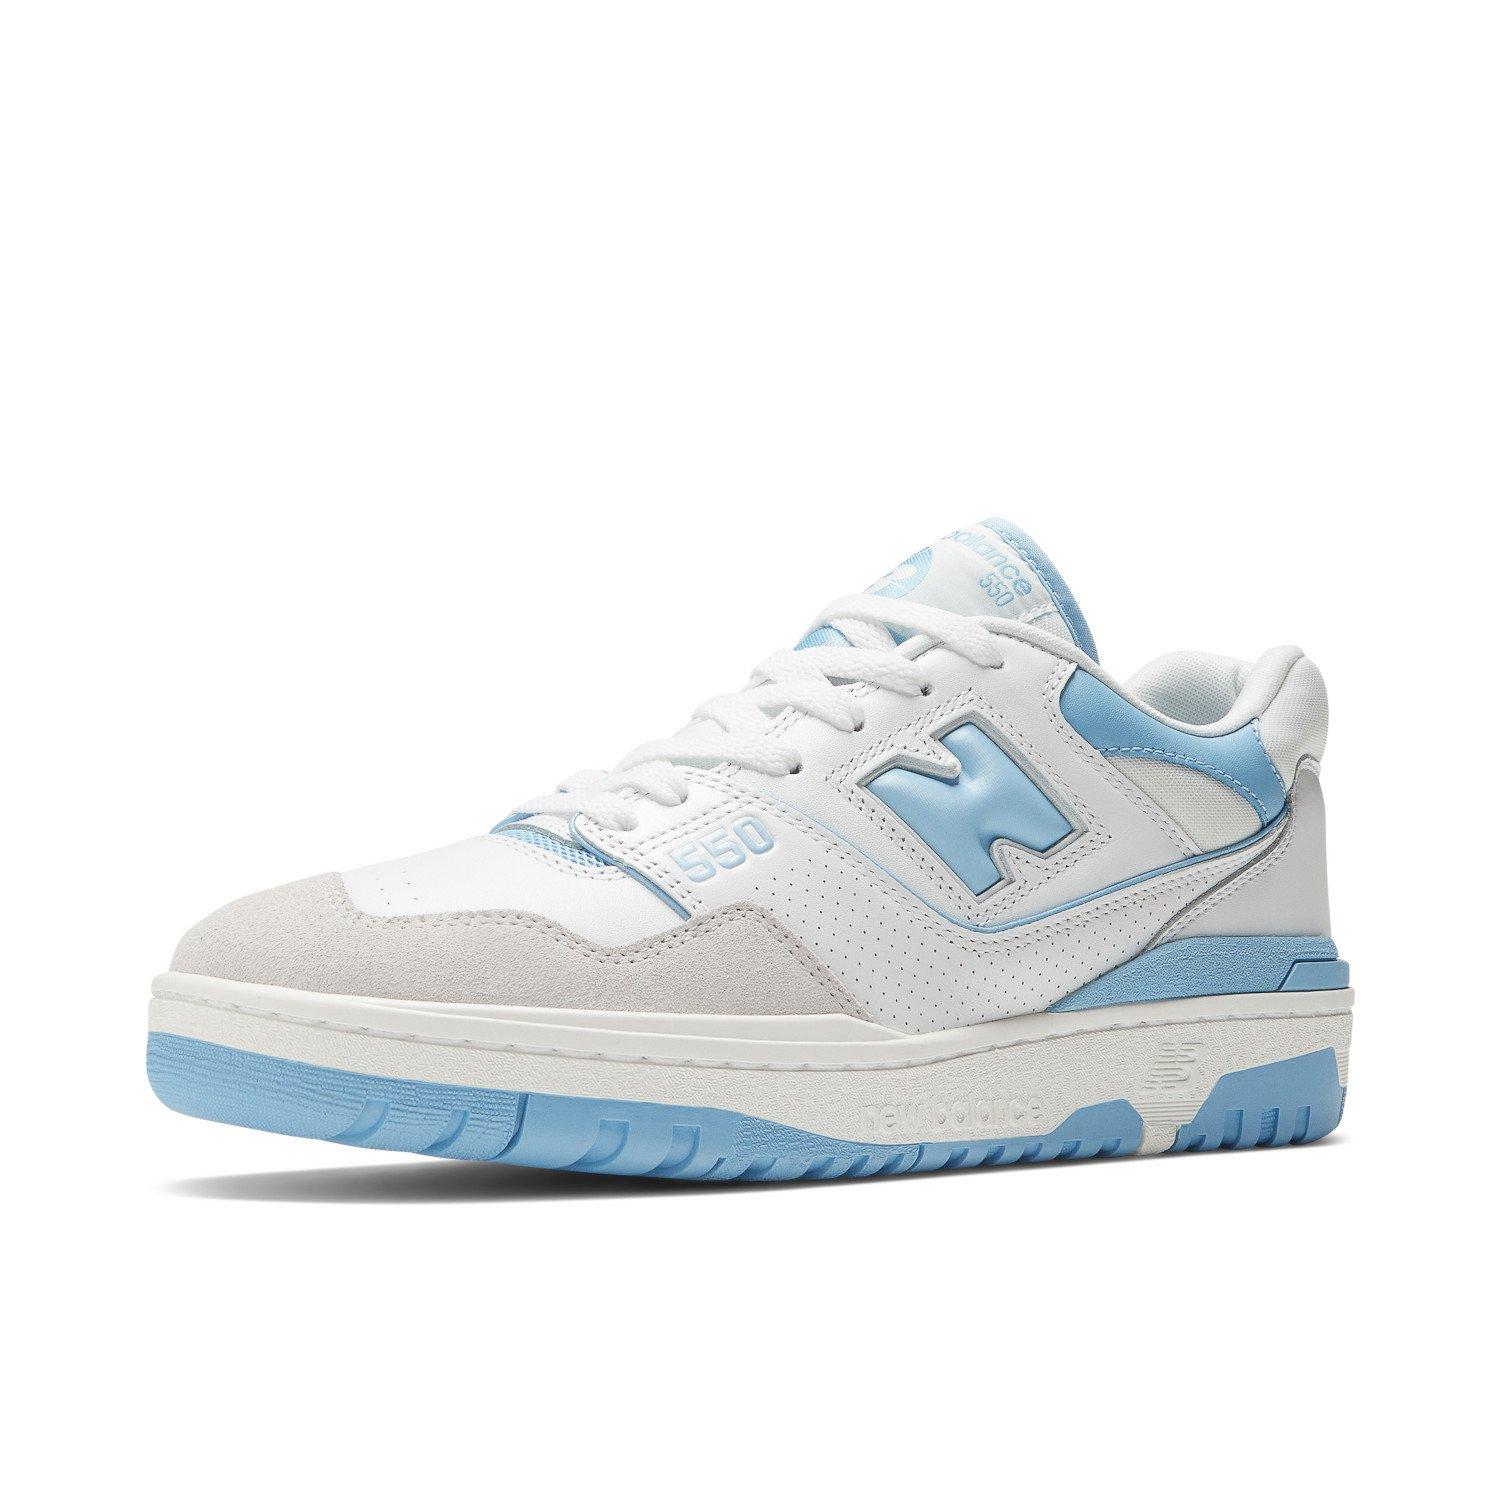 New Balance 550 White/Baby Blue Sneakers - Farfetch